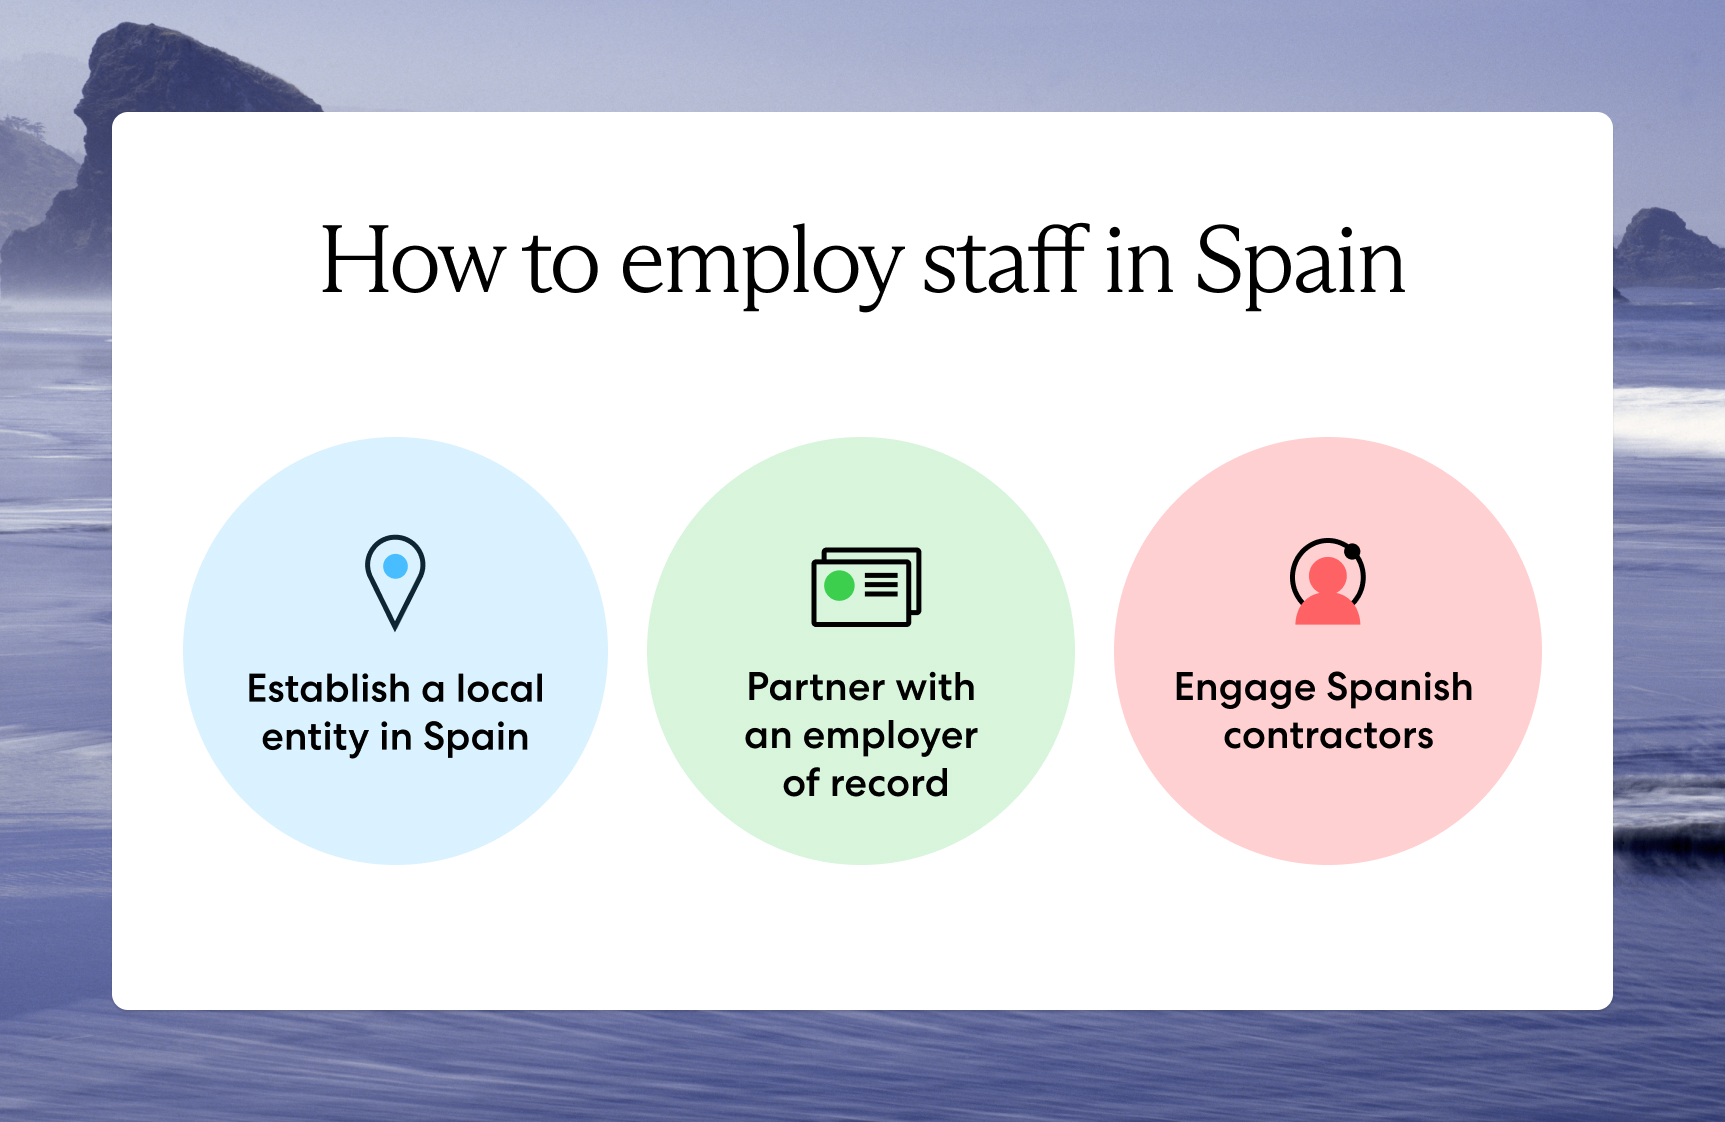 3 Options for hiring in Spain for a UK company: Establish an entity, partner with an employer of record, engage contractors